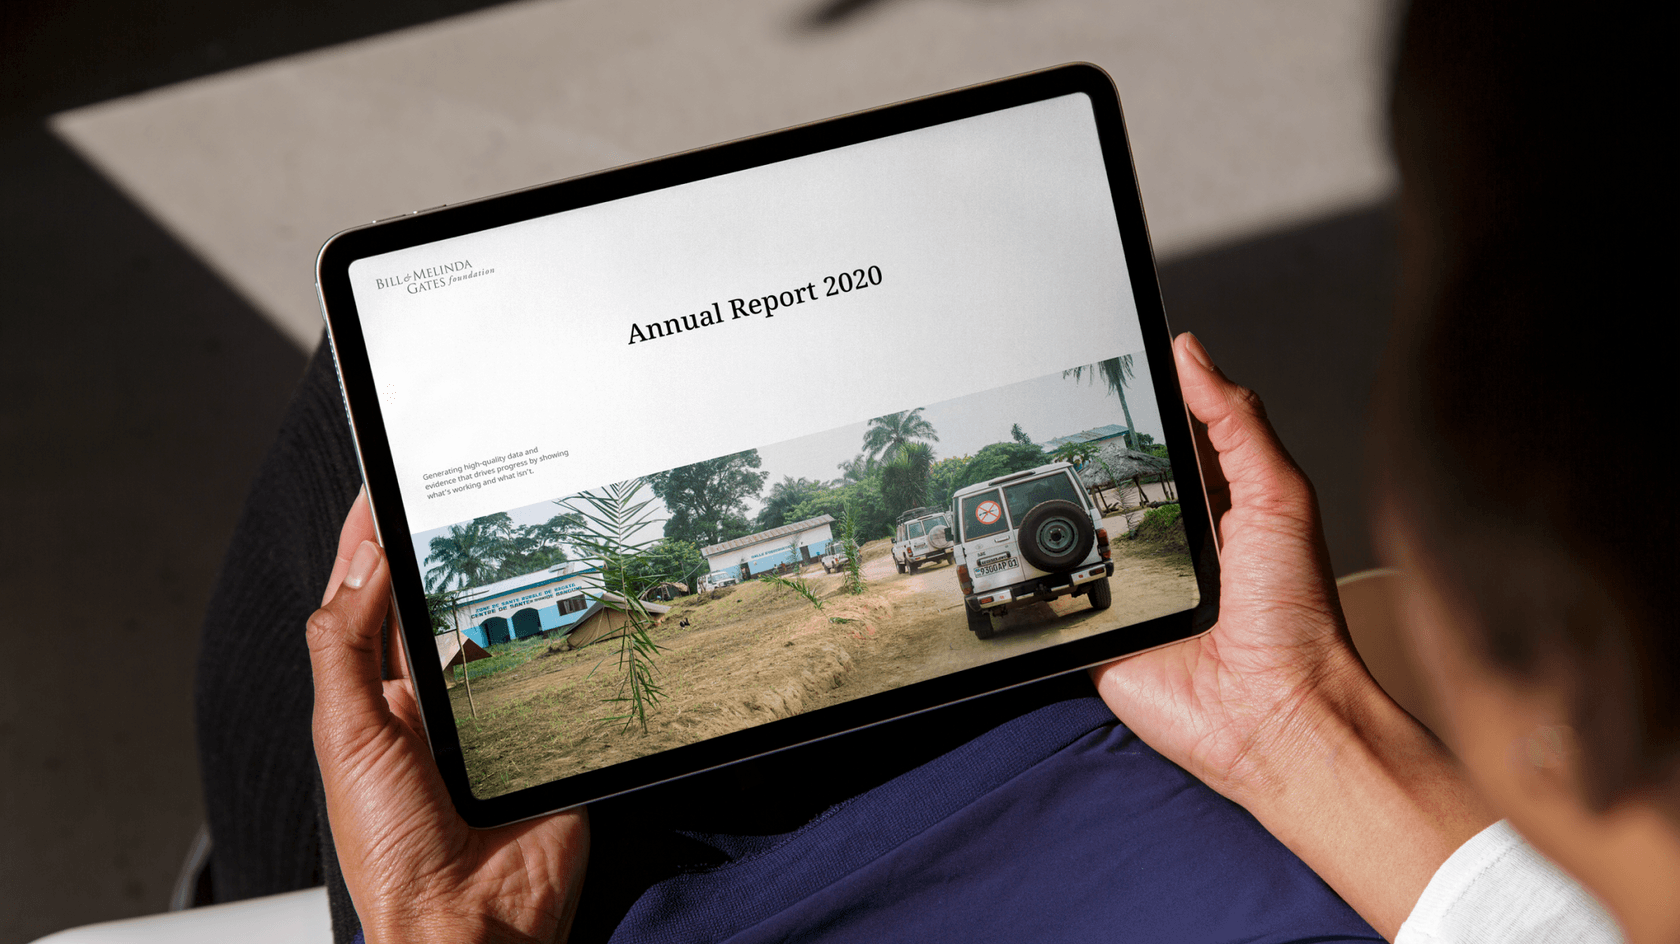 Tablet screen showing vehicle driving towards a rural health facility. Title reads Annual Report 2020.